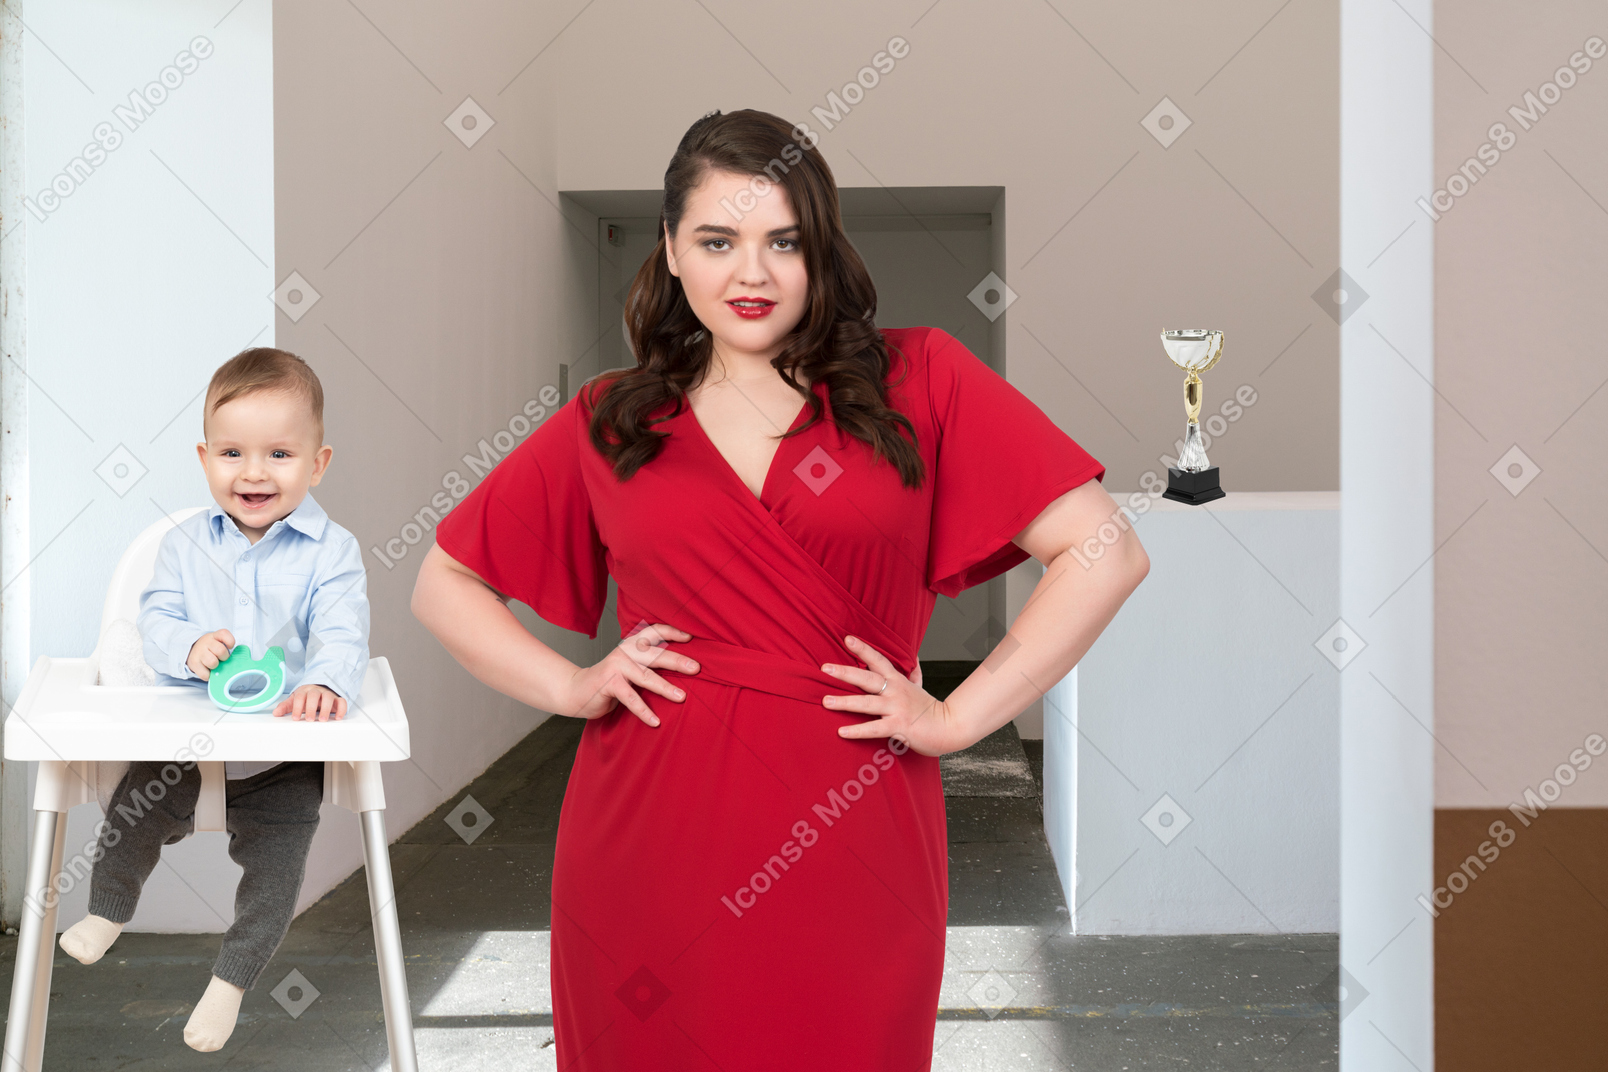 Mother holding baby in the room